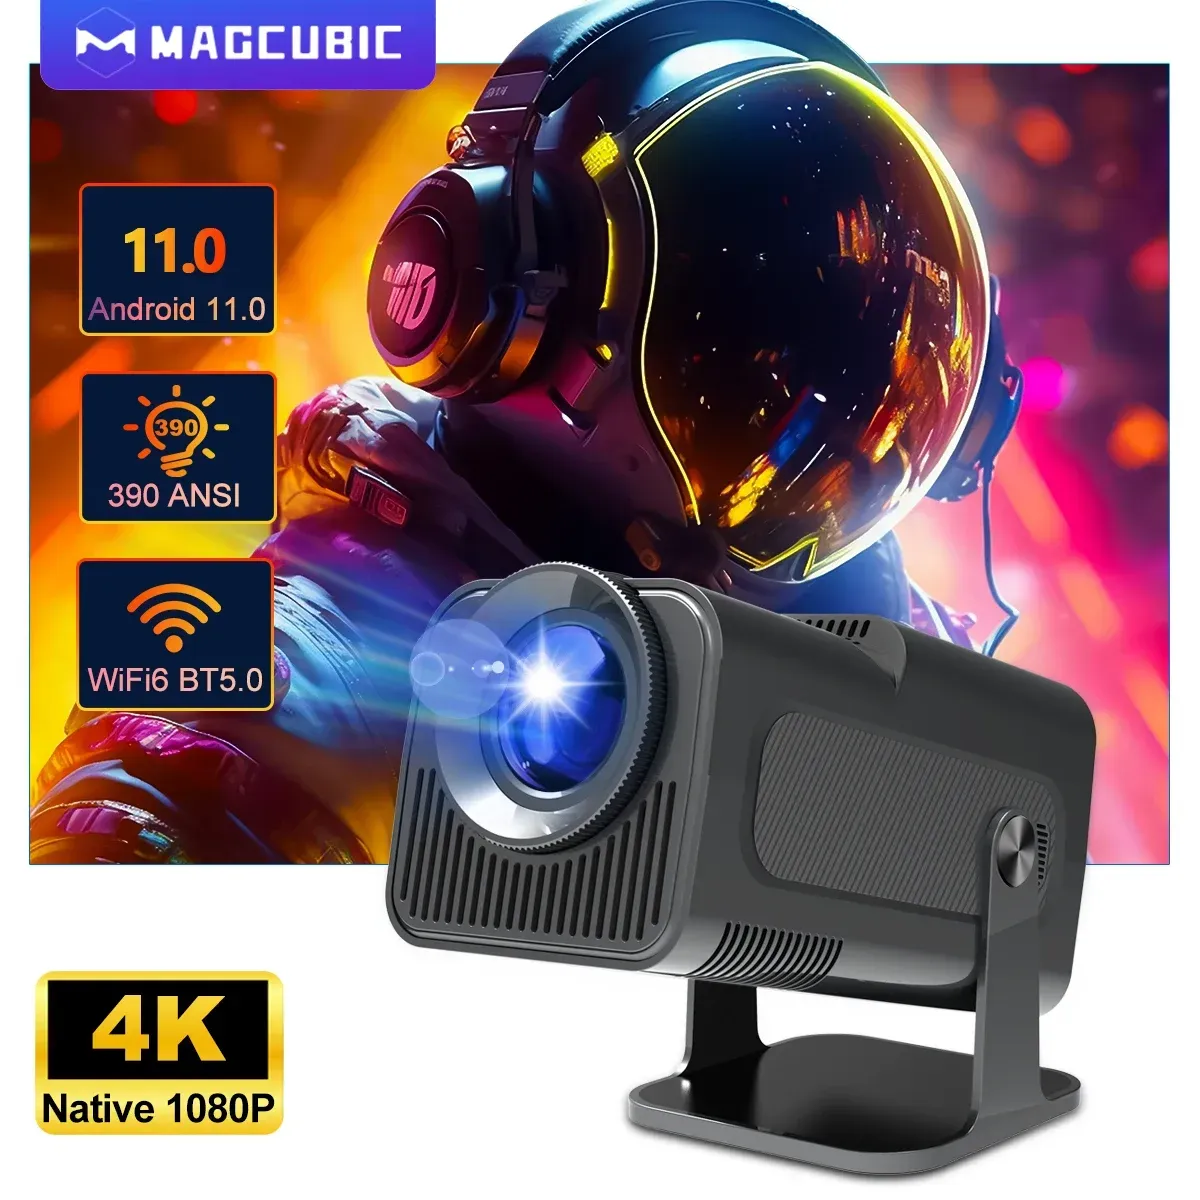 Mini Projetor Magcubic Hy320 Android 11, 1080p, 390ansi, Dual Wifi6, Bt5.0, 4k